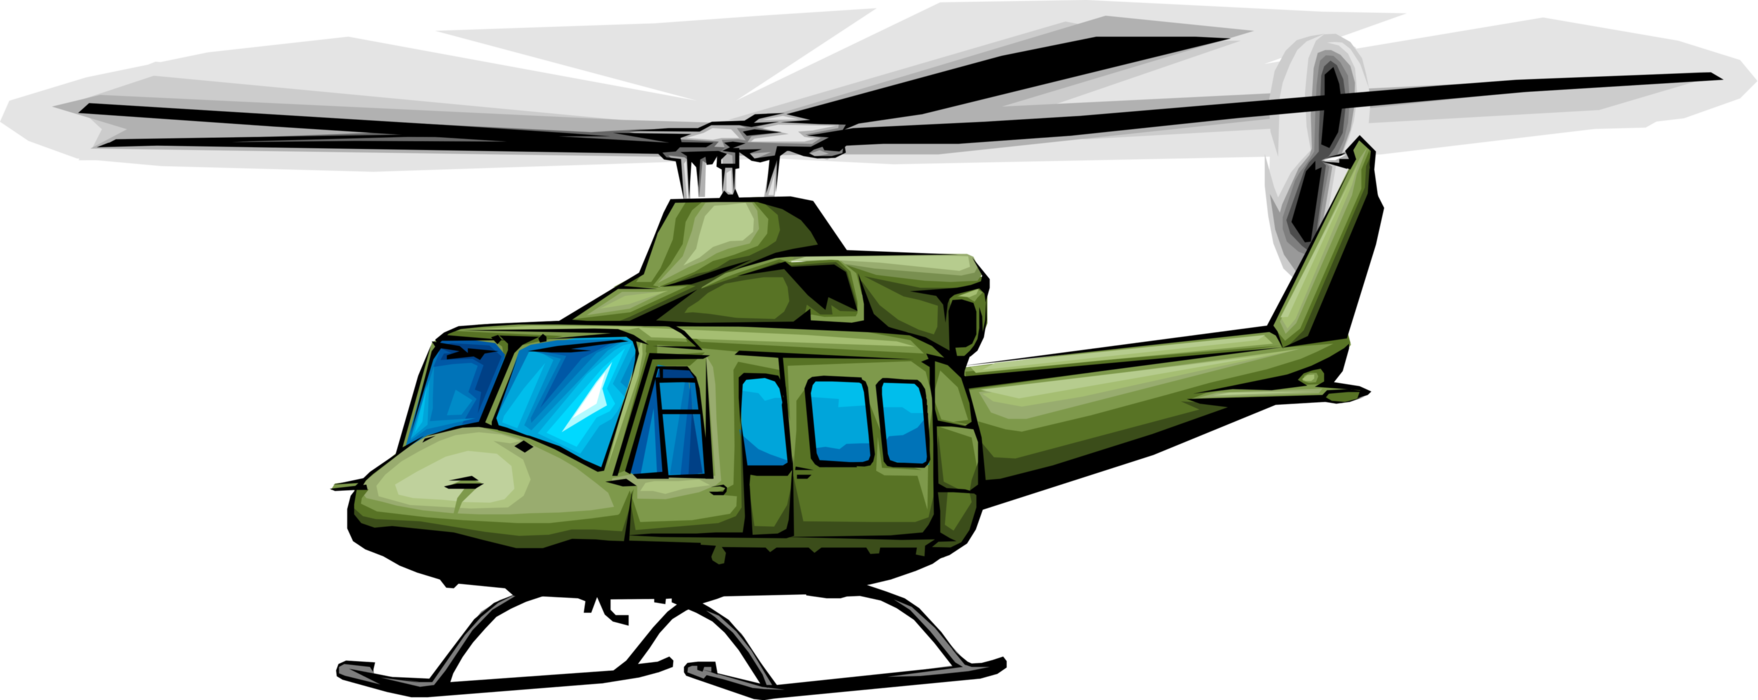 Vector Illustration of Military Helicopter Rotorcraft in Flight Applies Lift and Thrust Supplied by Rotors